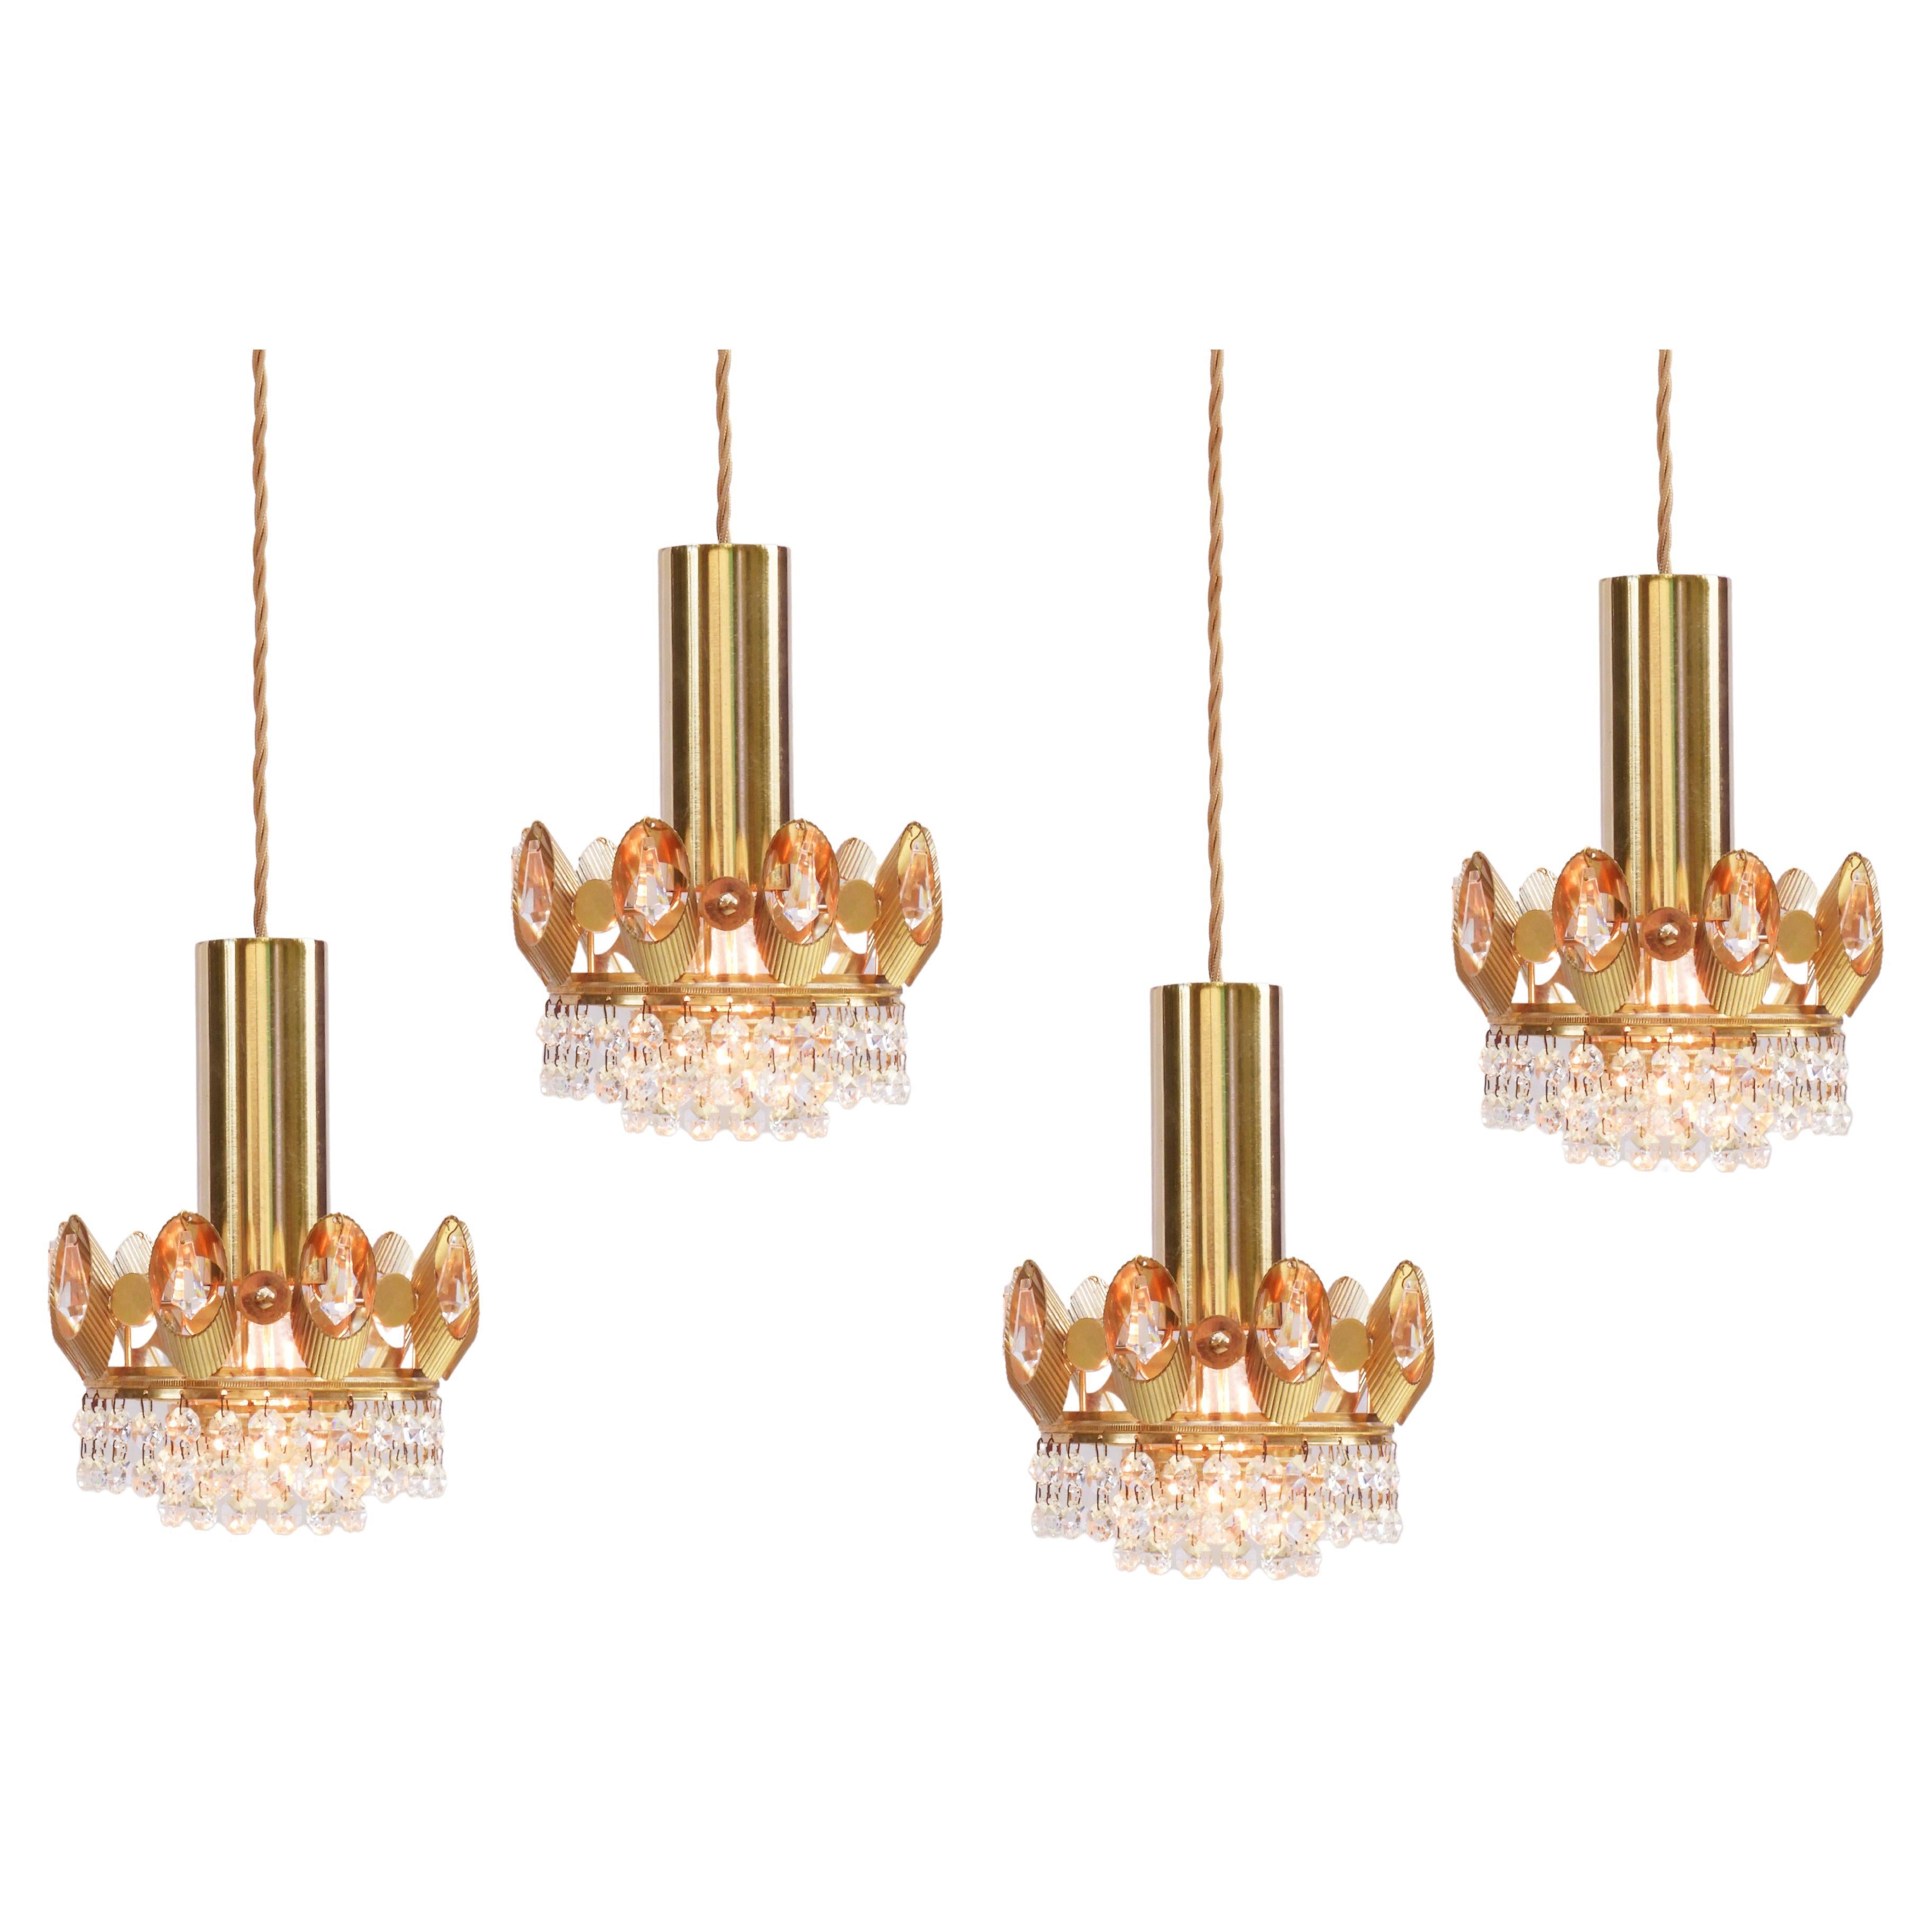 Palwa Crown Pendant Spot Light Chandeliers, C1970s, Germany  For Sale 1